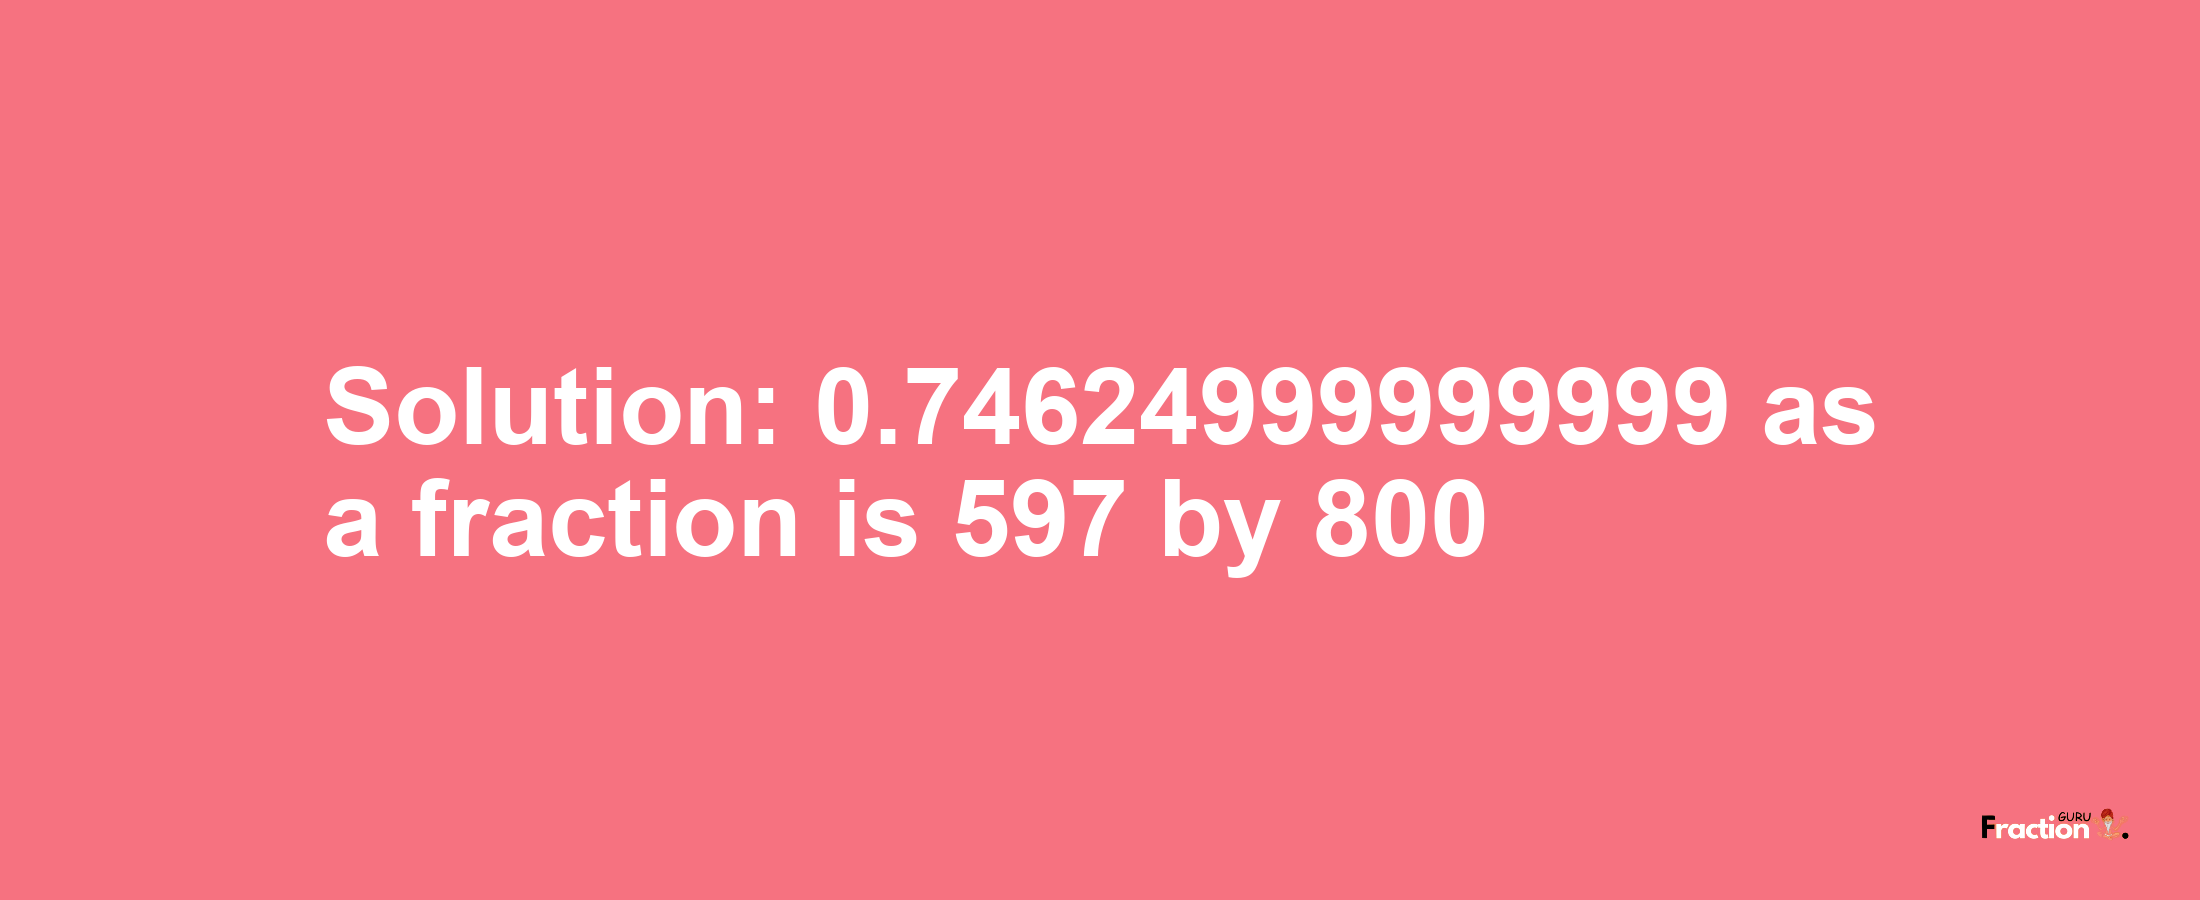 Solution:0.74624999999999 as a fraction is 597/800